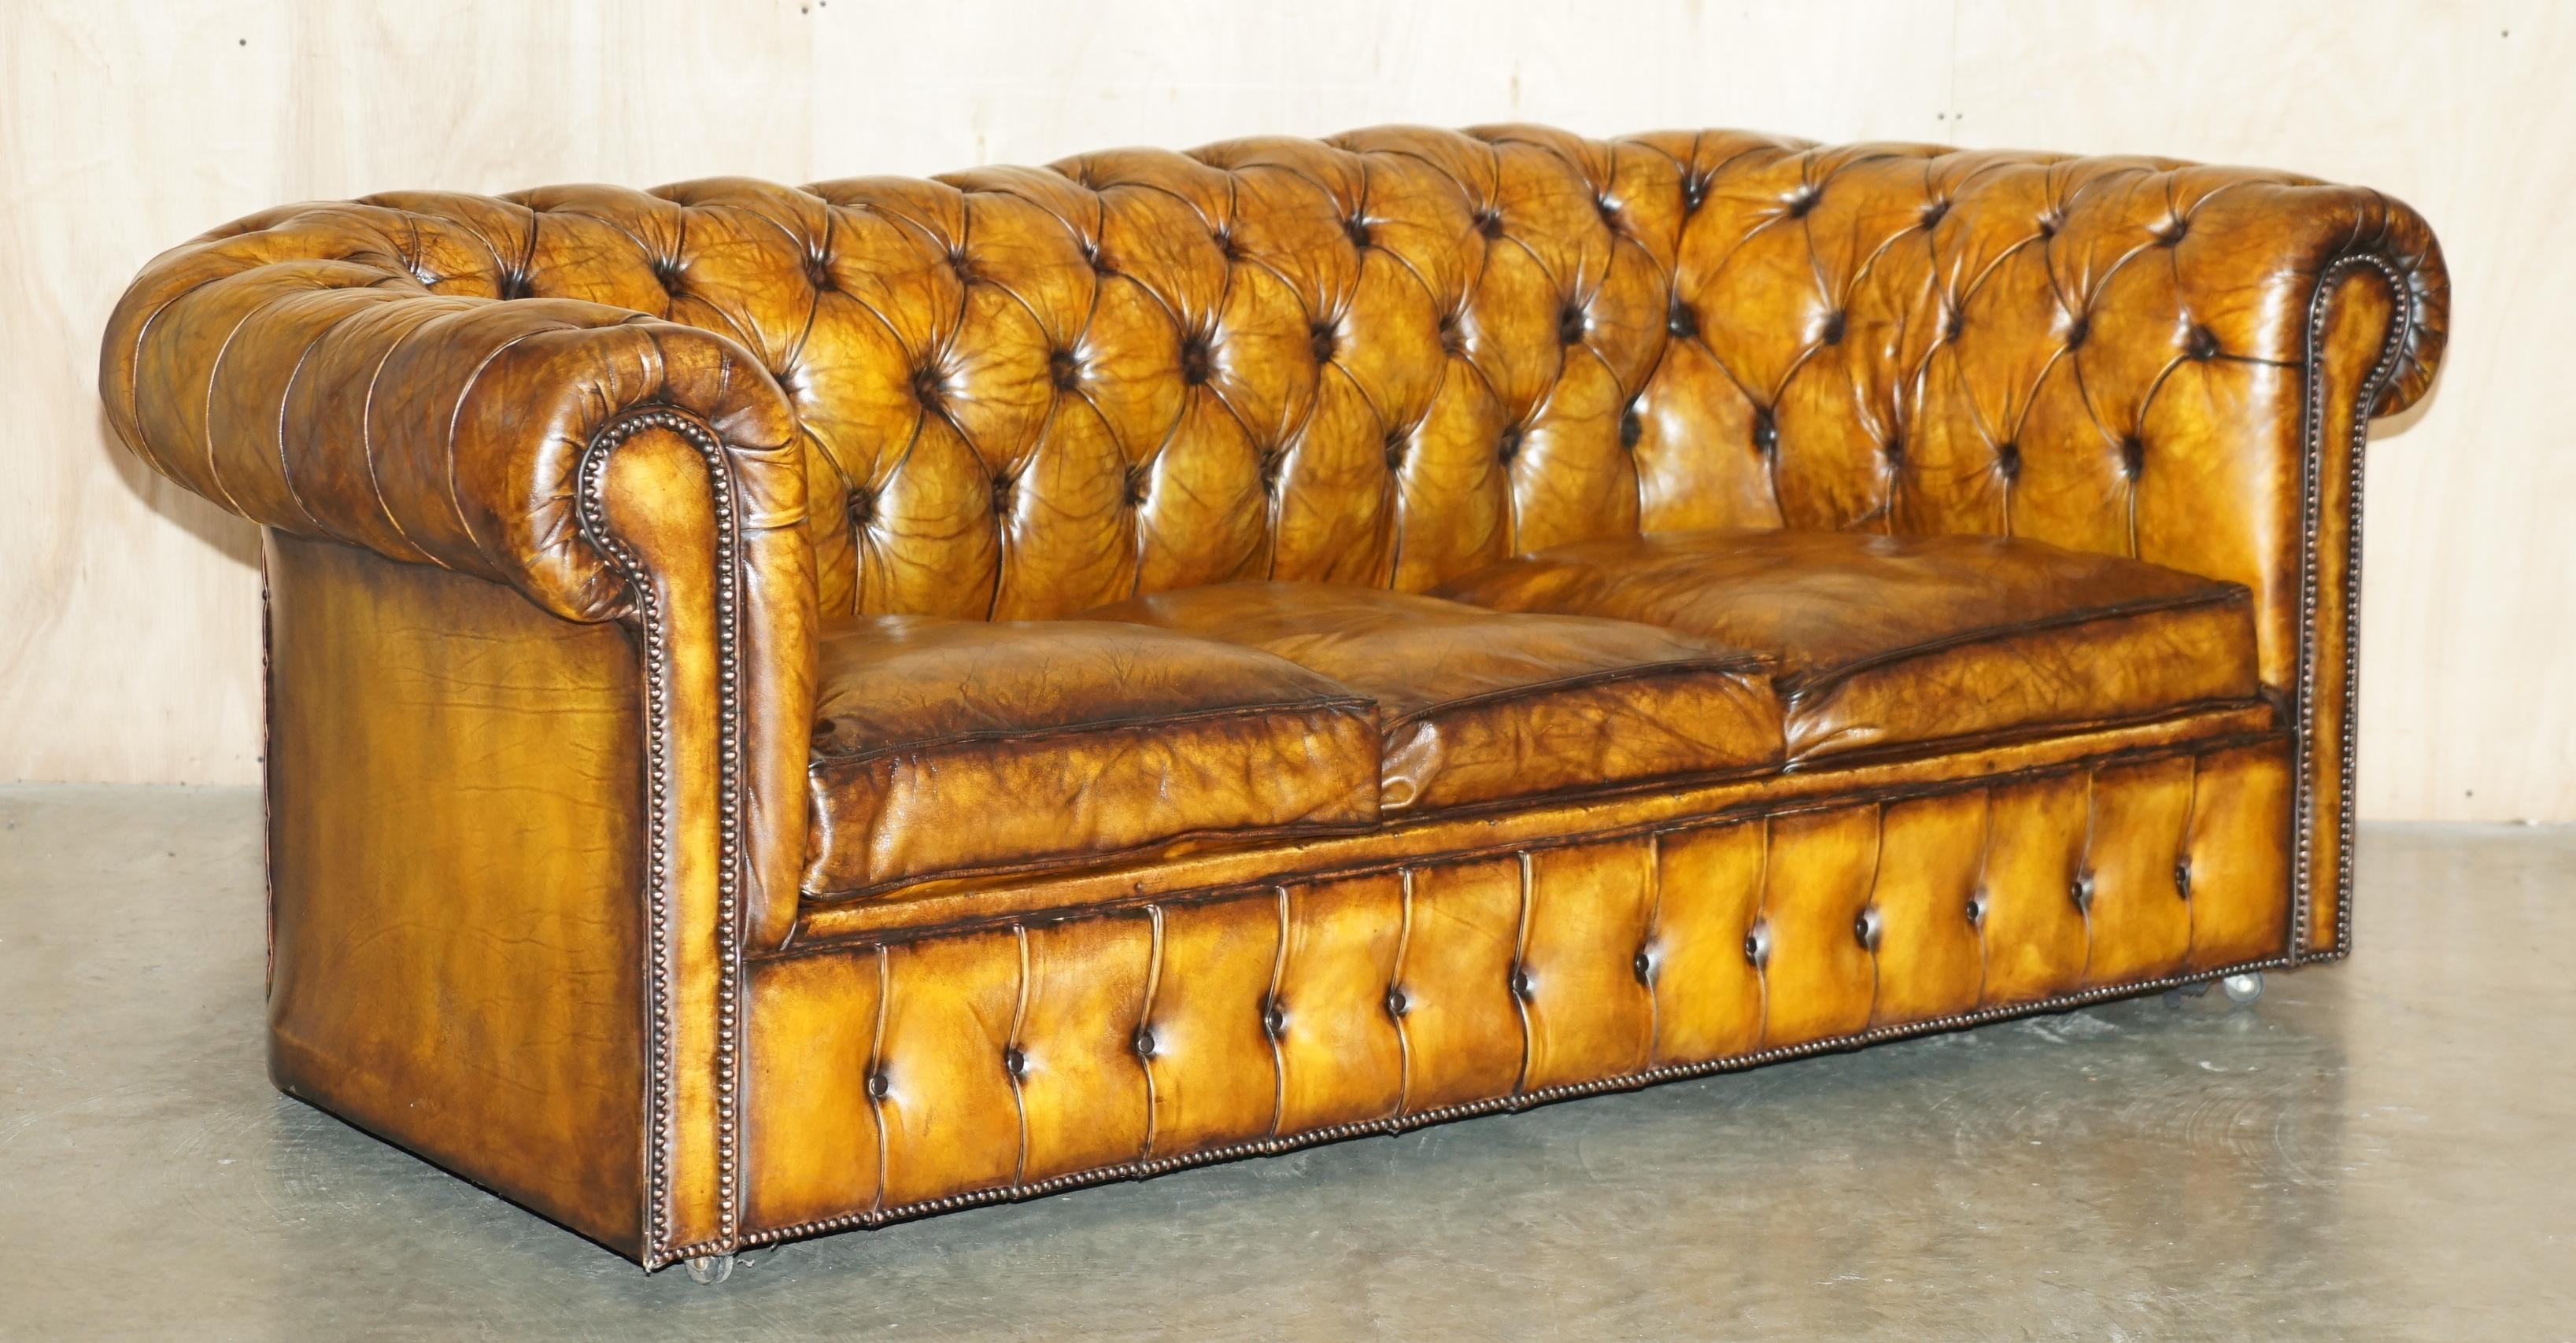 We are delighted to offer for sale this super rare, highly collectable circa 1940's fully restored Chesterfield sofa bed which is part of a set

This sofa is one of a pair, I have the sofa bed and then a matching standard sofa, this sale is for the